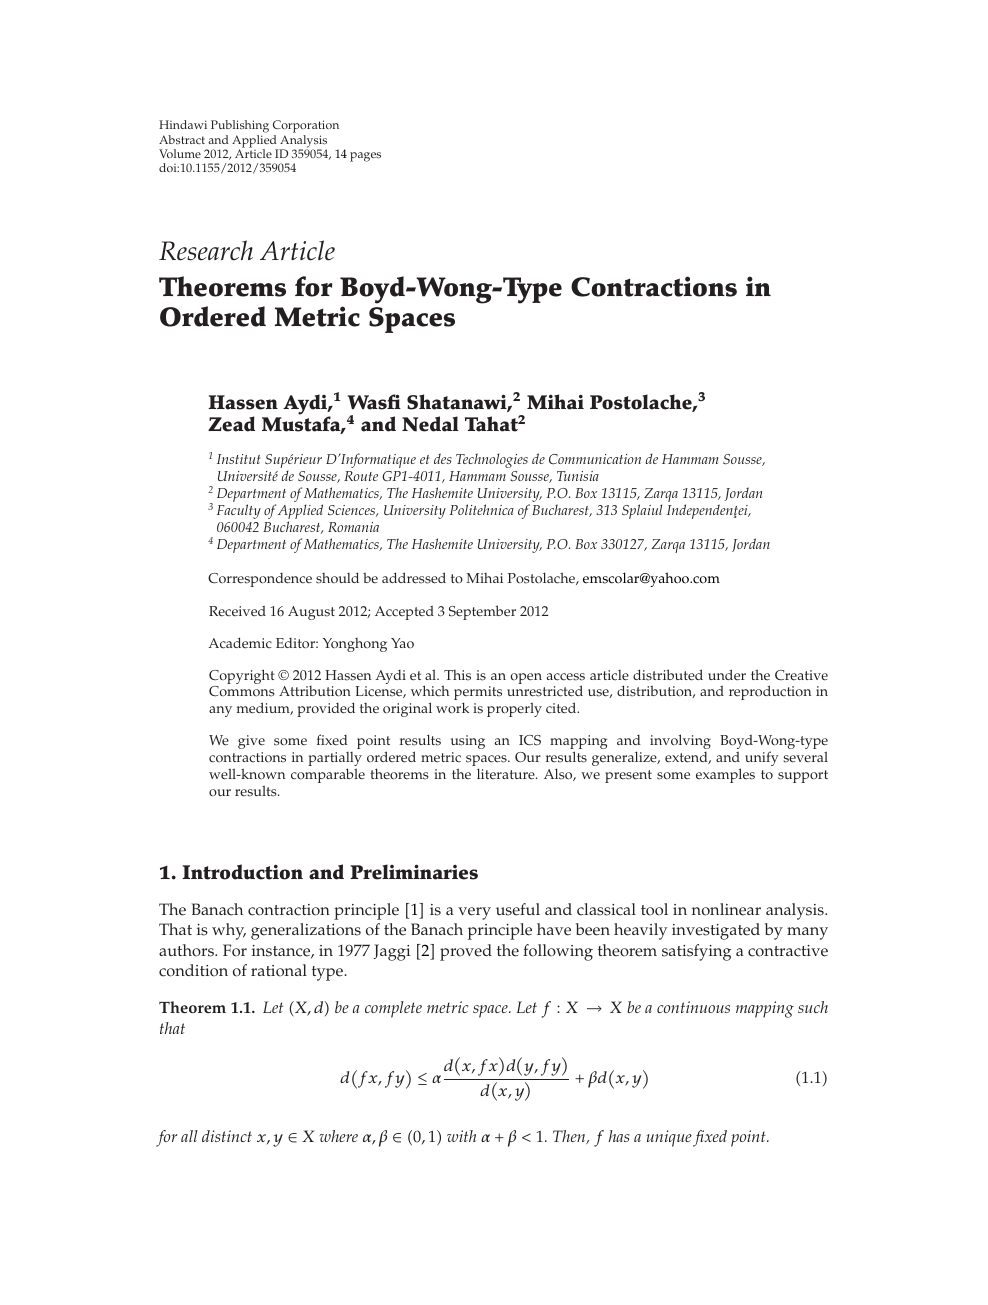 Theorems For Boyd Wong Type Contractions In Ordered Metric Spaces Topic Of Research Paper In Mathematics Download Scholarly Article Pdf And Read For Free On Cyberleninka Open Science Hub